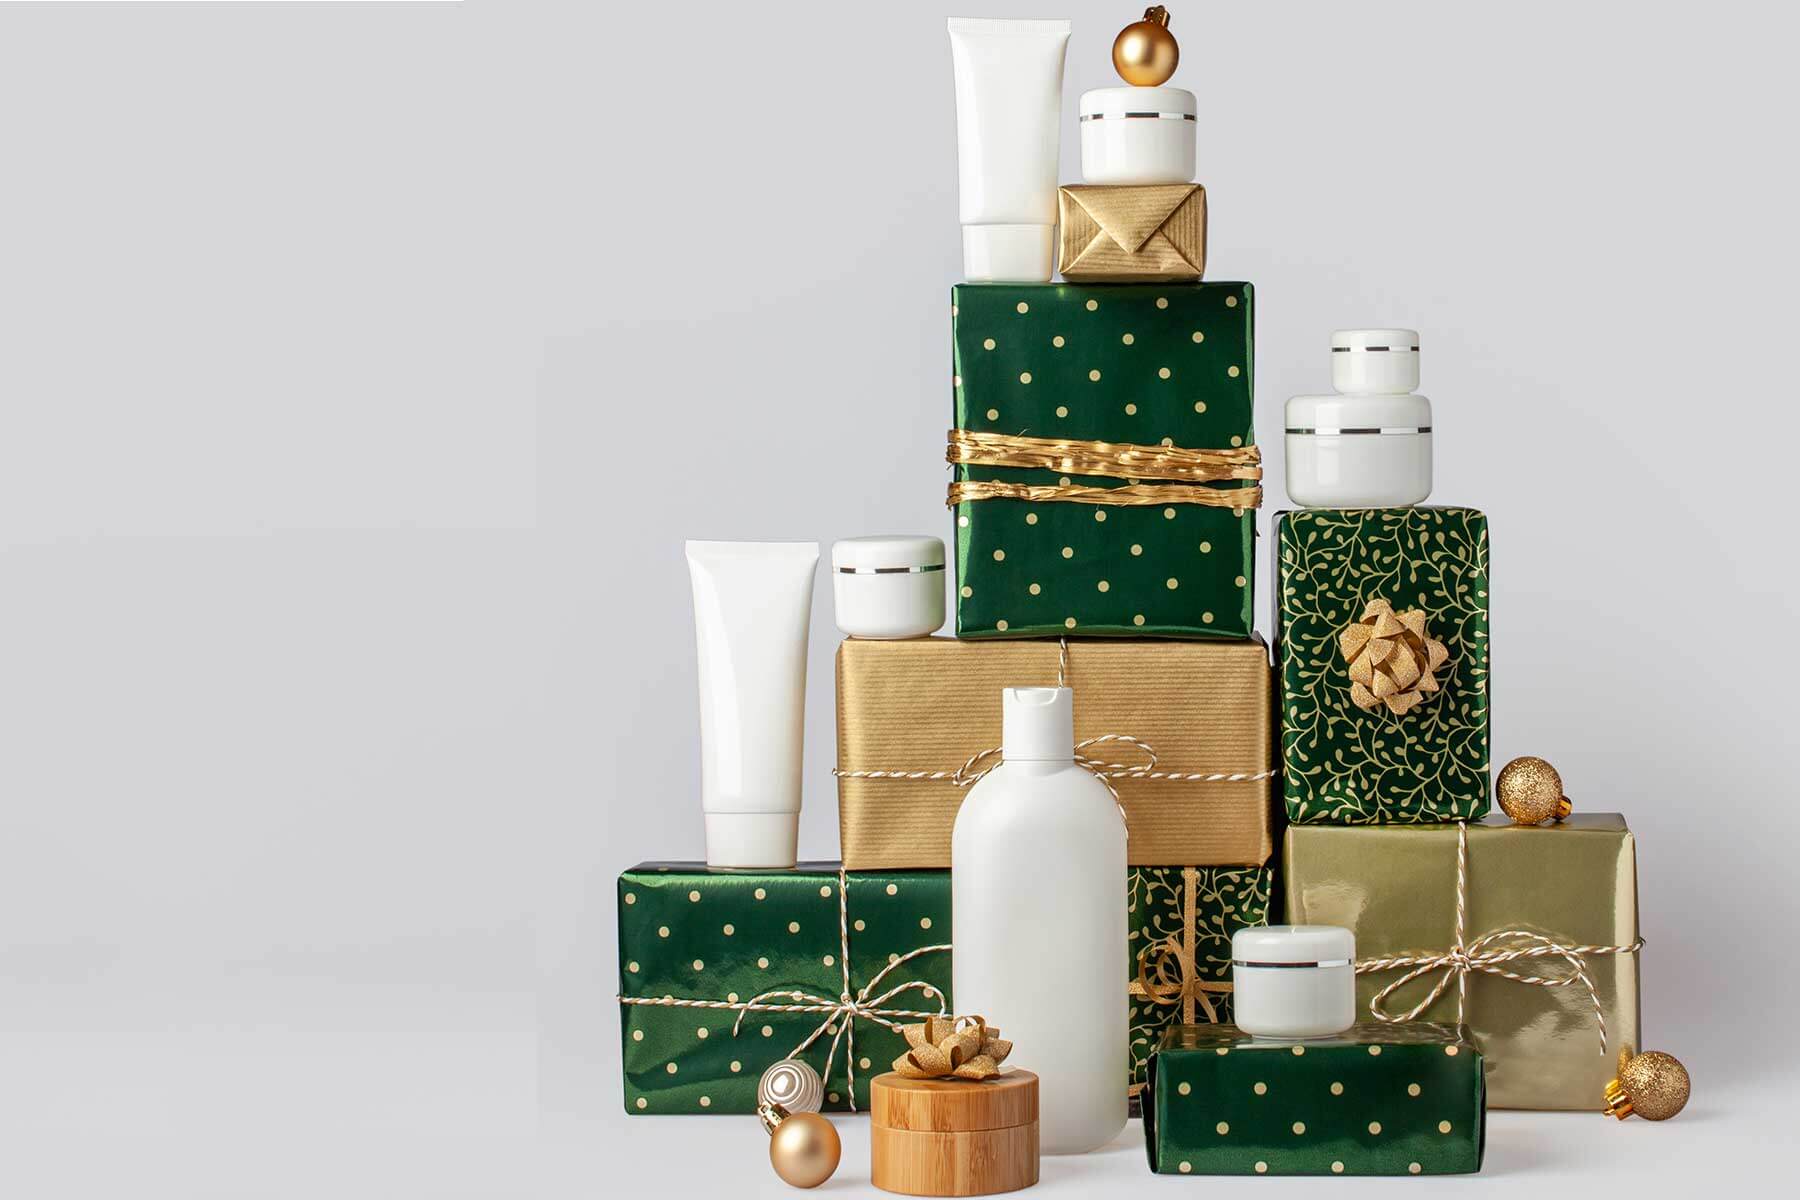 Top 5 beauty advent calendars to Inspire your 2022 strategy